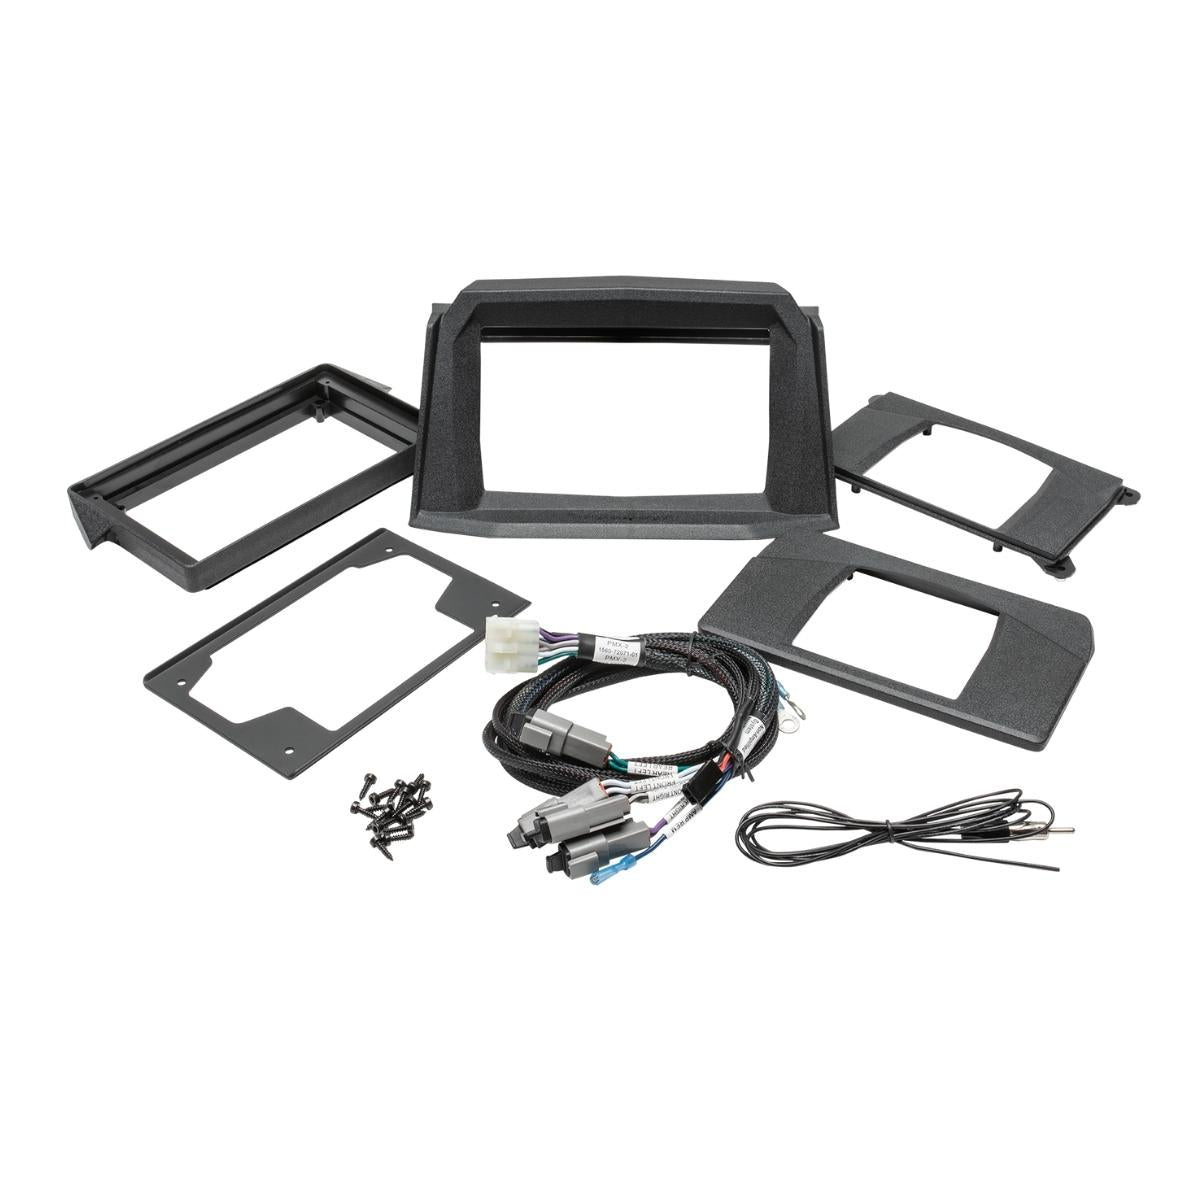 RZR14-DK PMX-3, PMX-2, PMX-1 & PMX-8DH upper/lower dash kit for select RZR models